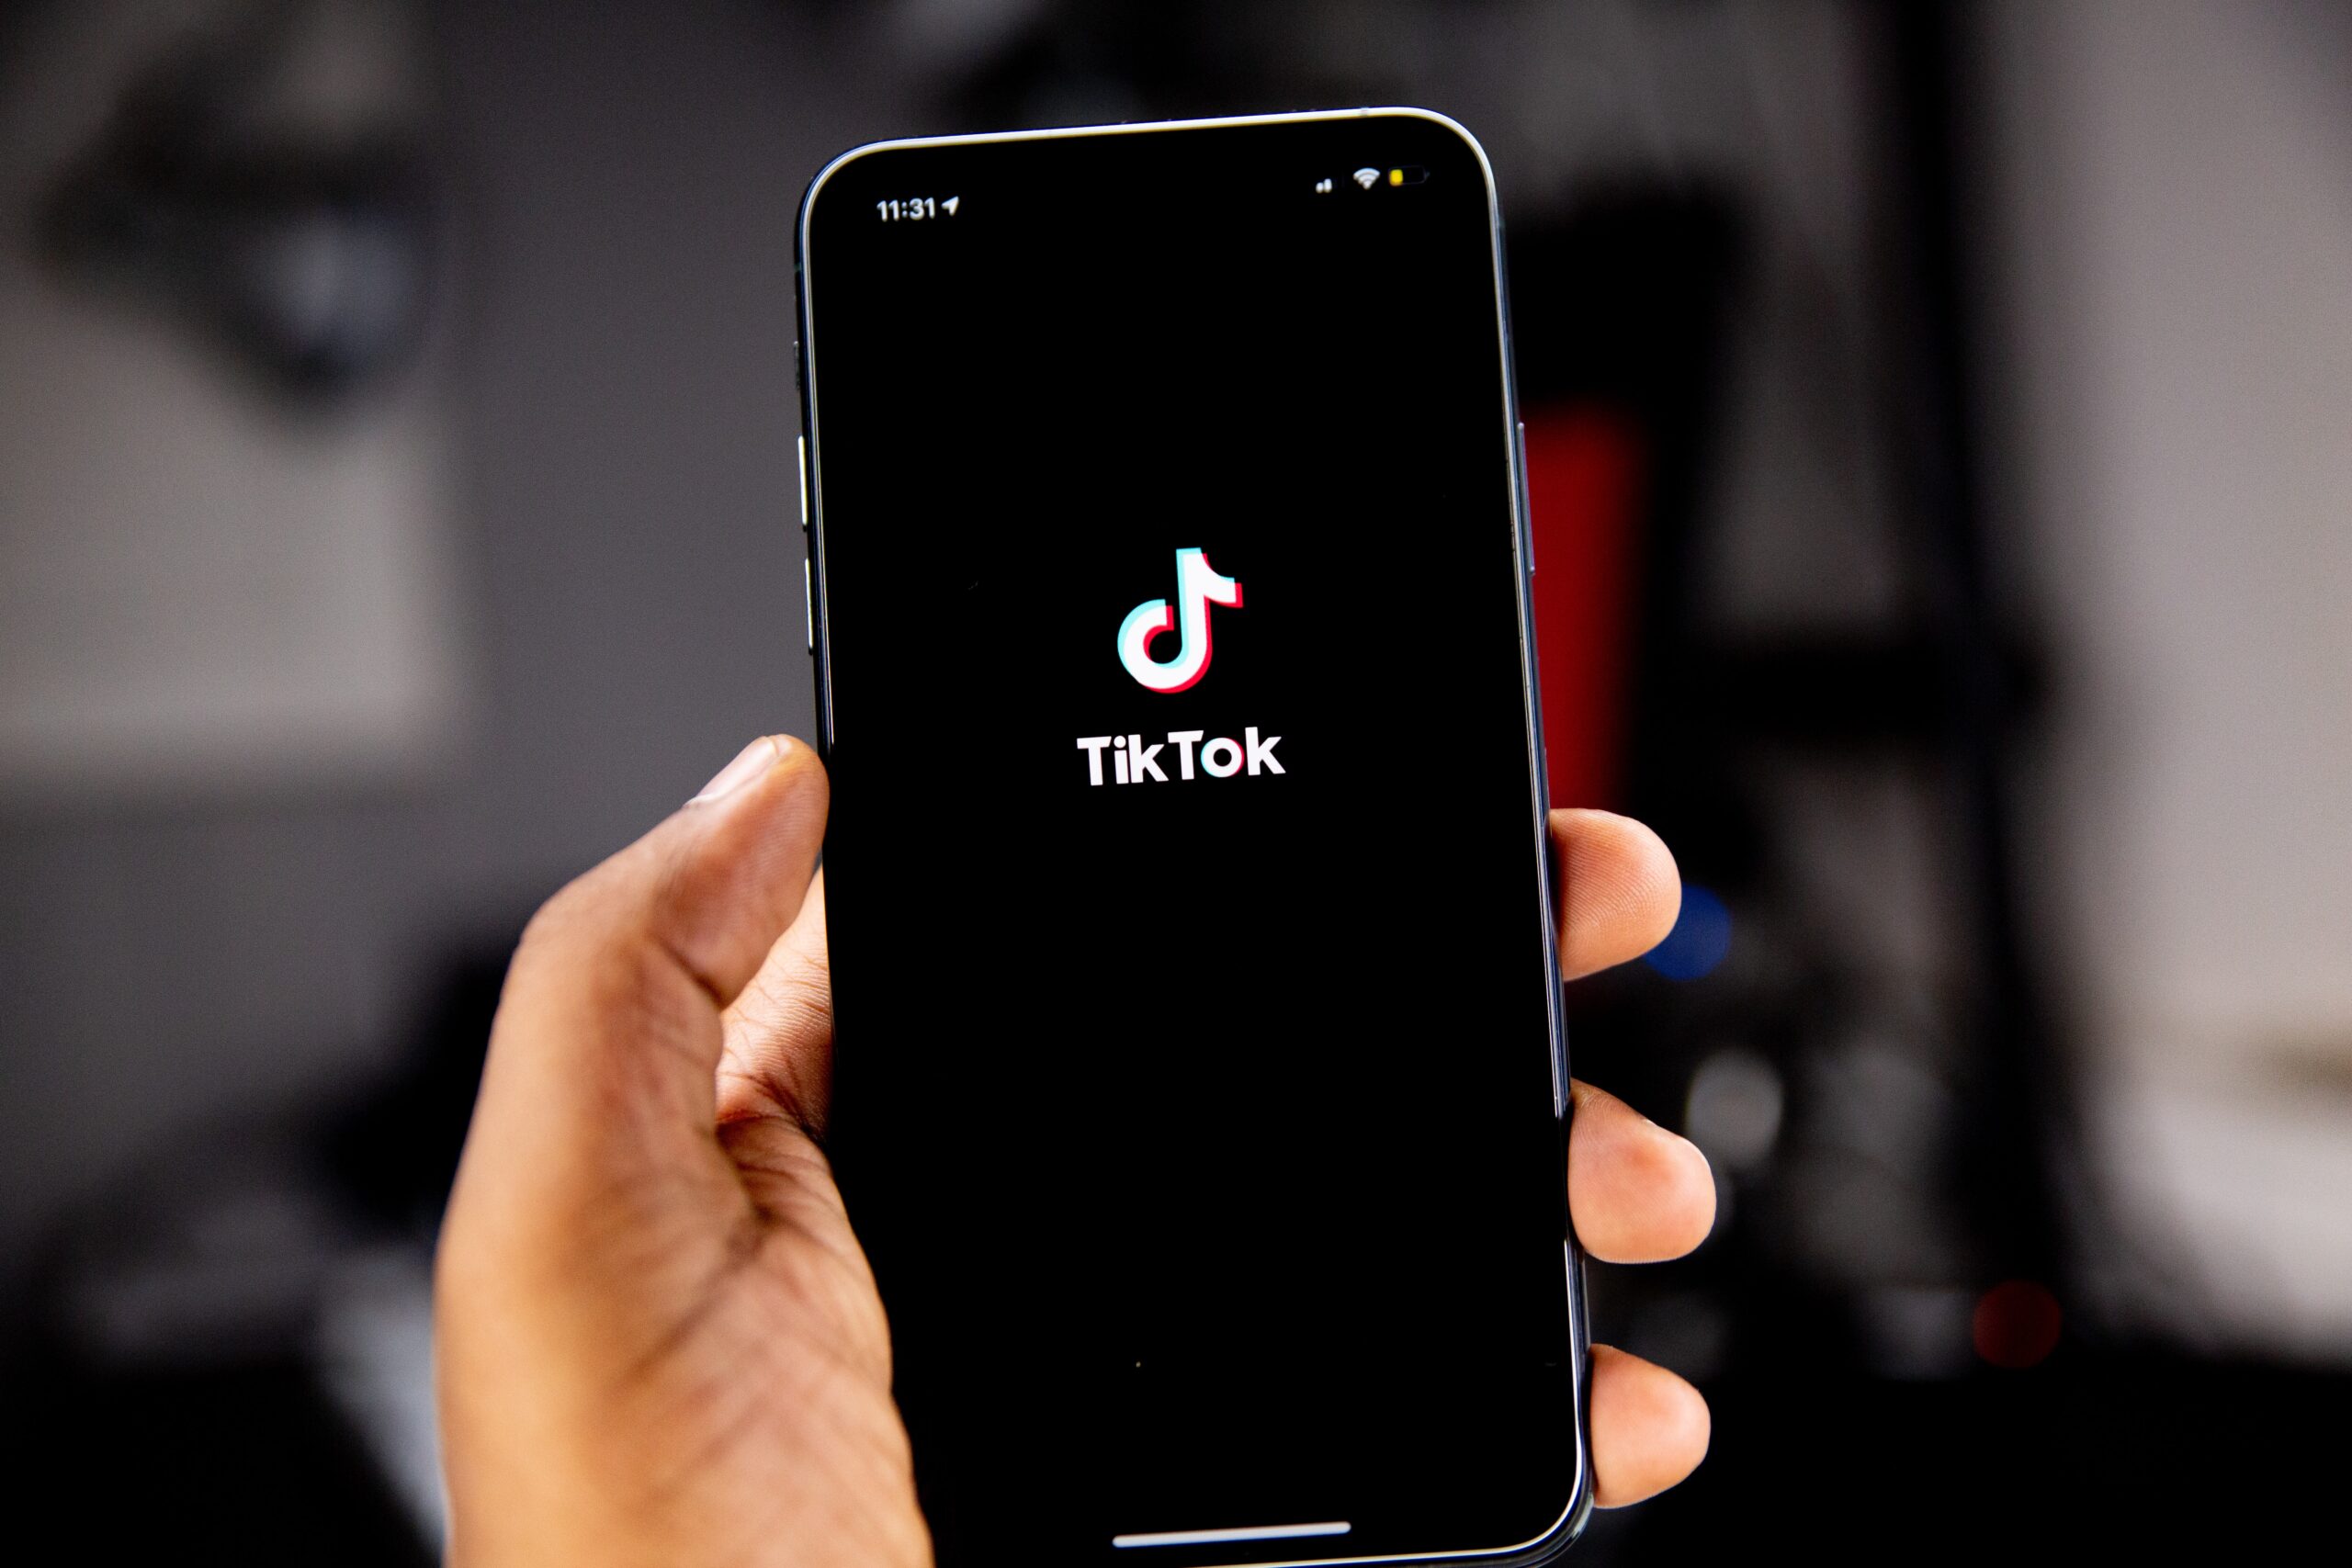 What You Need to Know This Week on TikTok